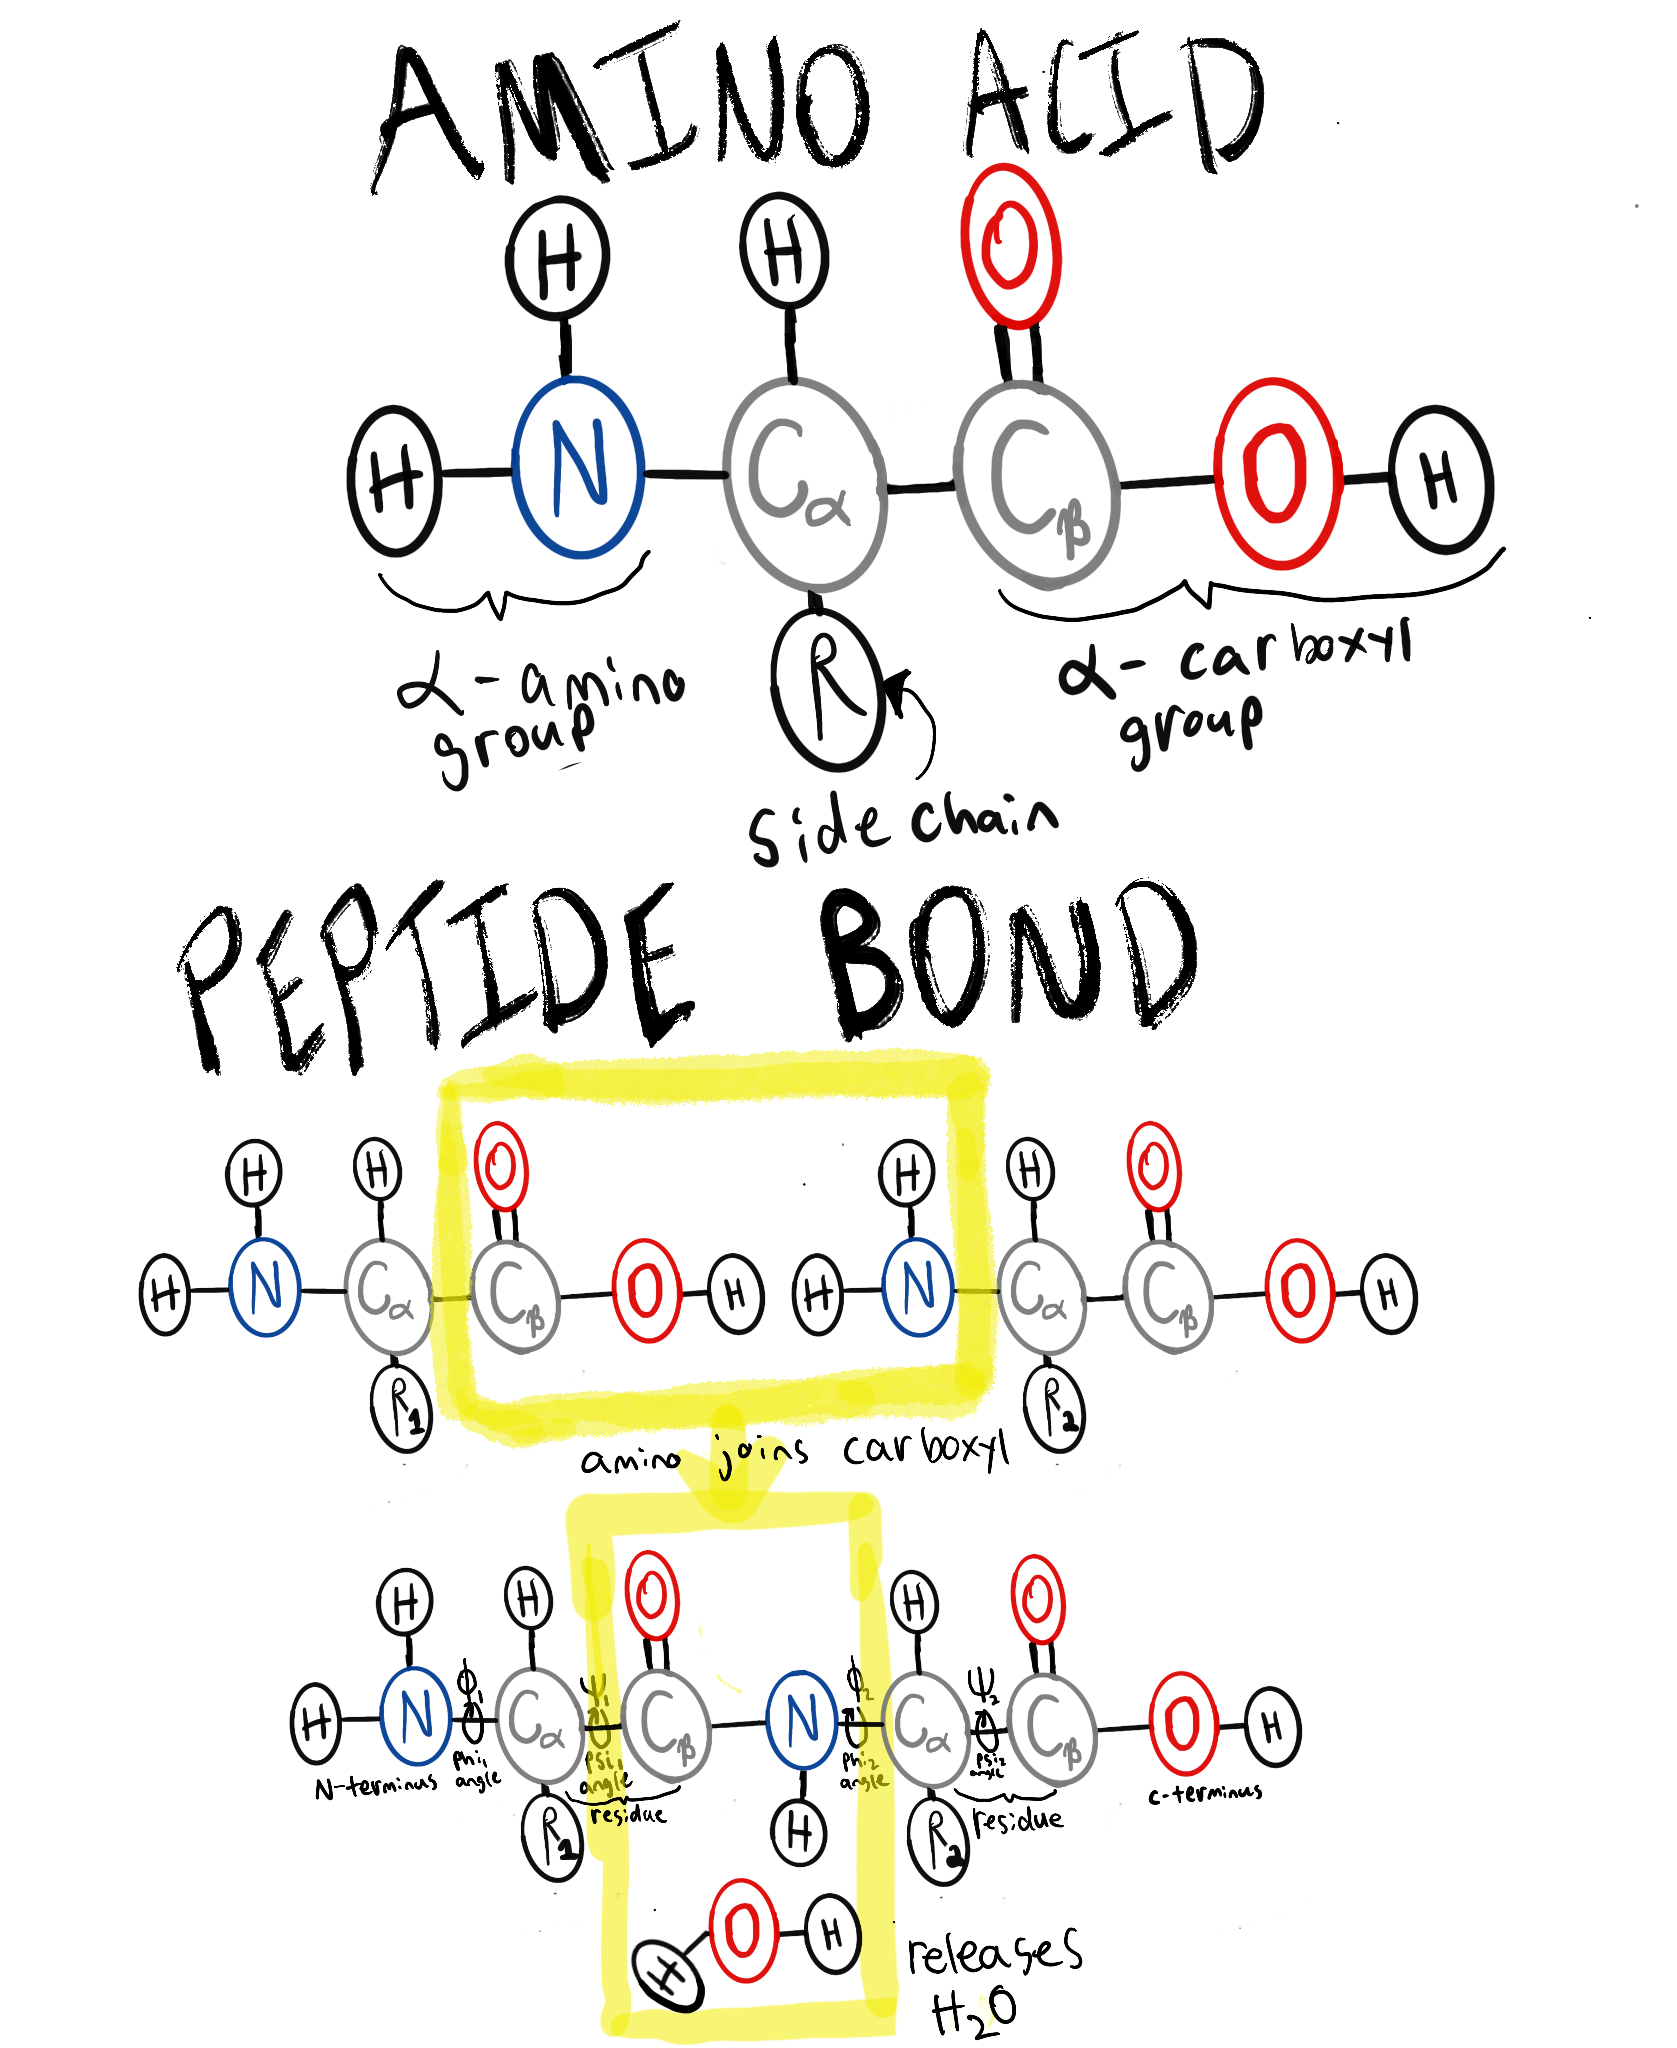 Amino Acid and Peptide bond. The amino acid has an amino group and a carboxyl group joined by an alpha carbon atom to an amino-acid specific side-chain. Amino acids form peptide bonds by joining the amino group of one acid to the carboxyl group of another acid, and releasing H20.